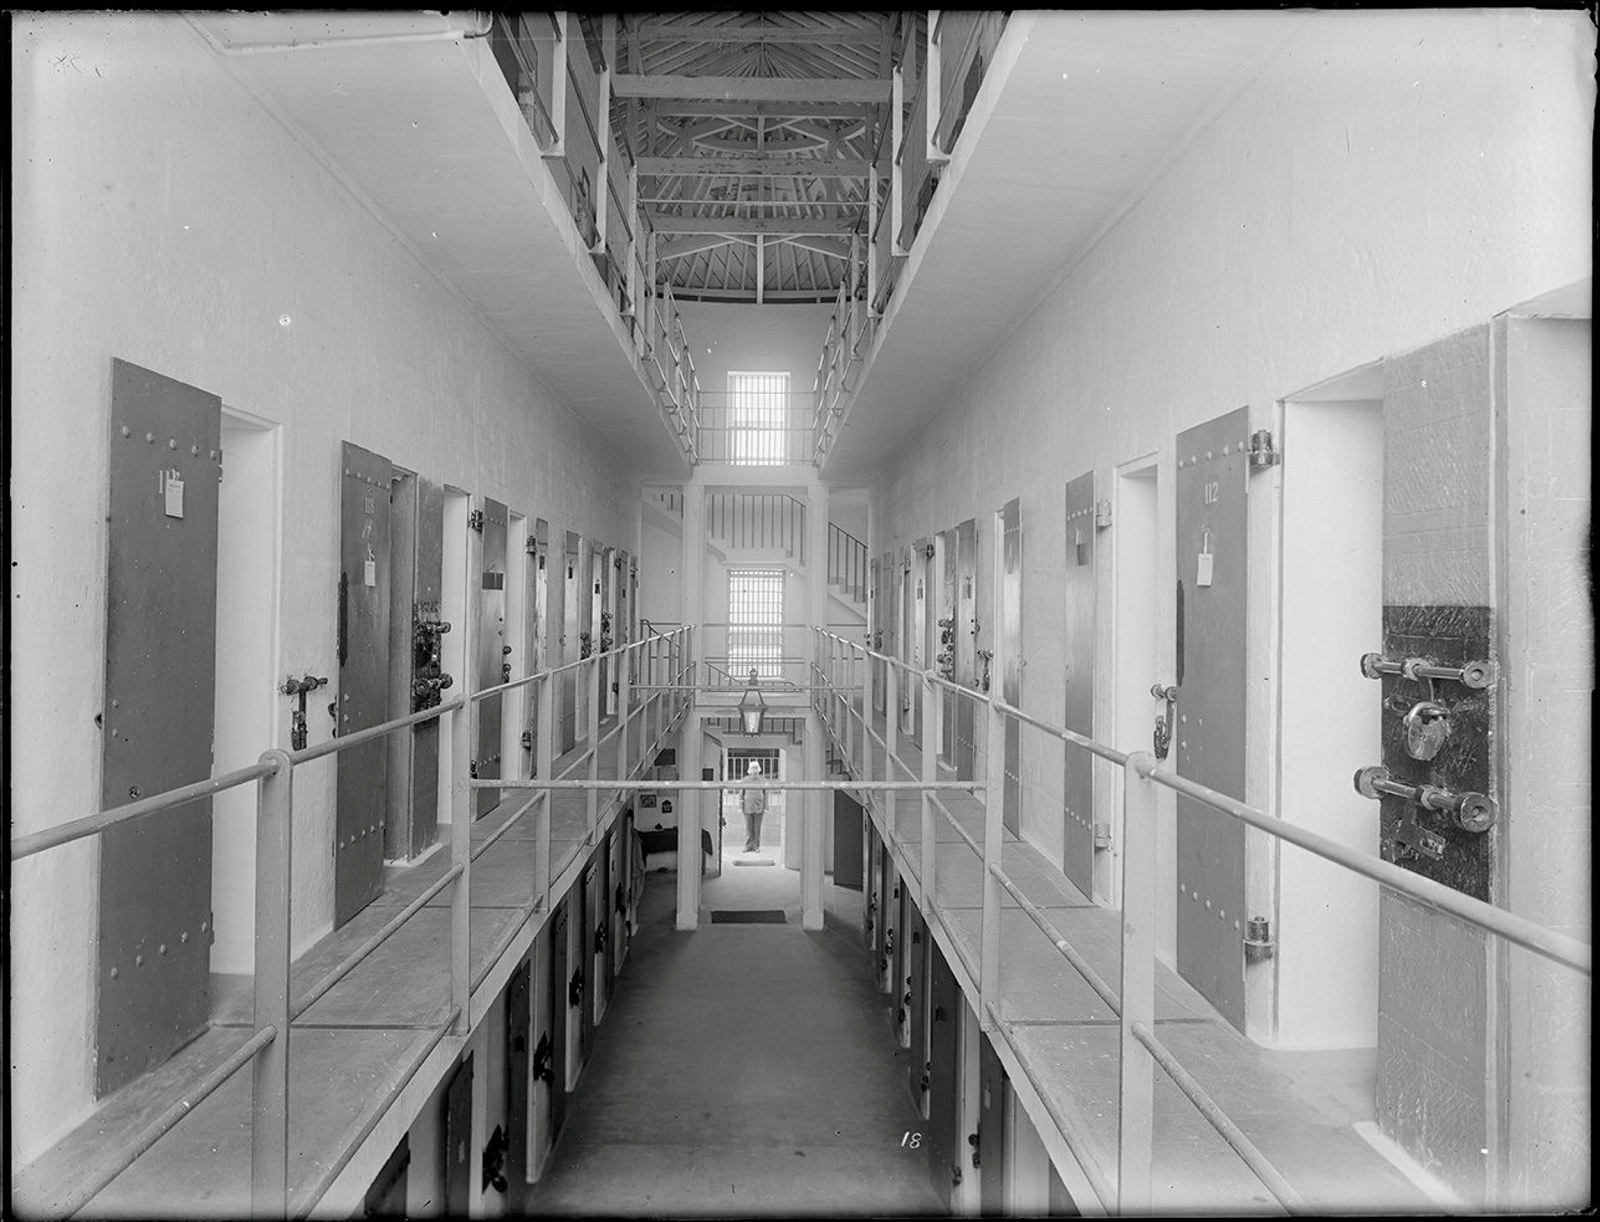 Government Printing Office; NRS 4481, Parramatta [Gaol] [Department of Public Works] [no date]